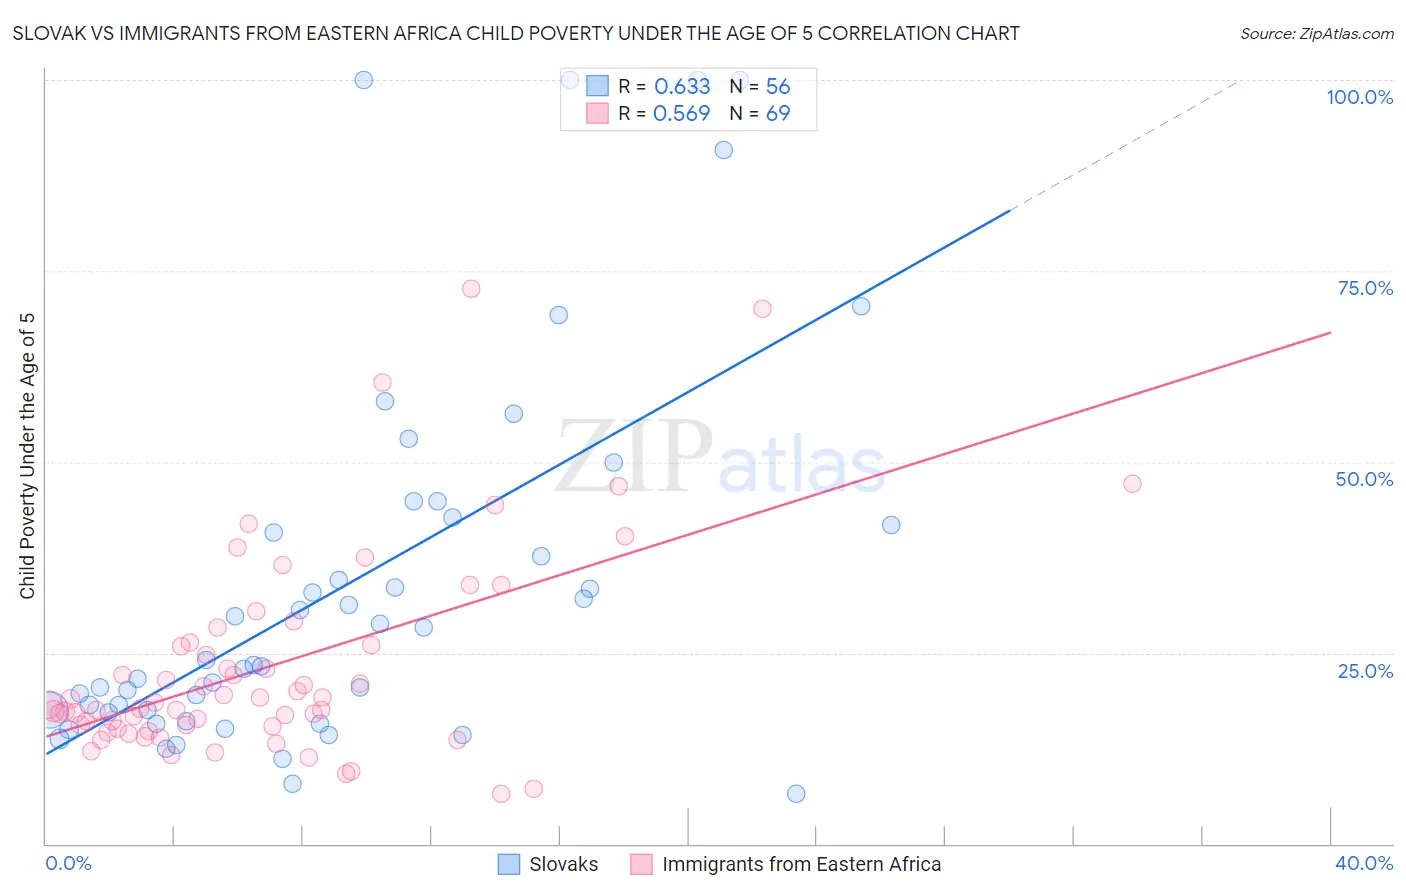 Slovak vs Immigrants from Eastern Africa Child Poverty Under the Age of 5